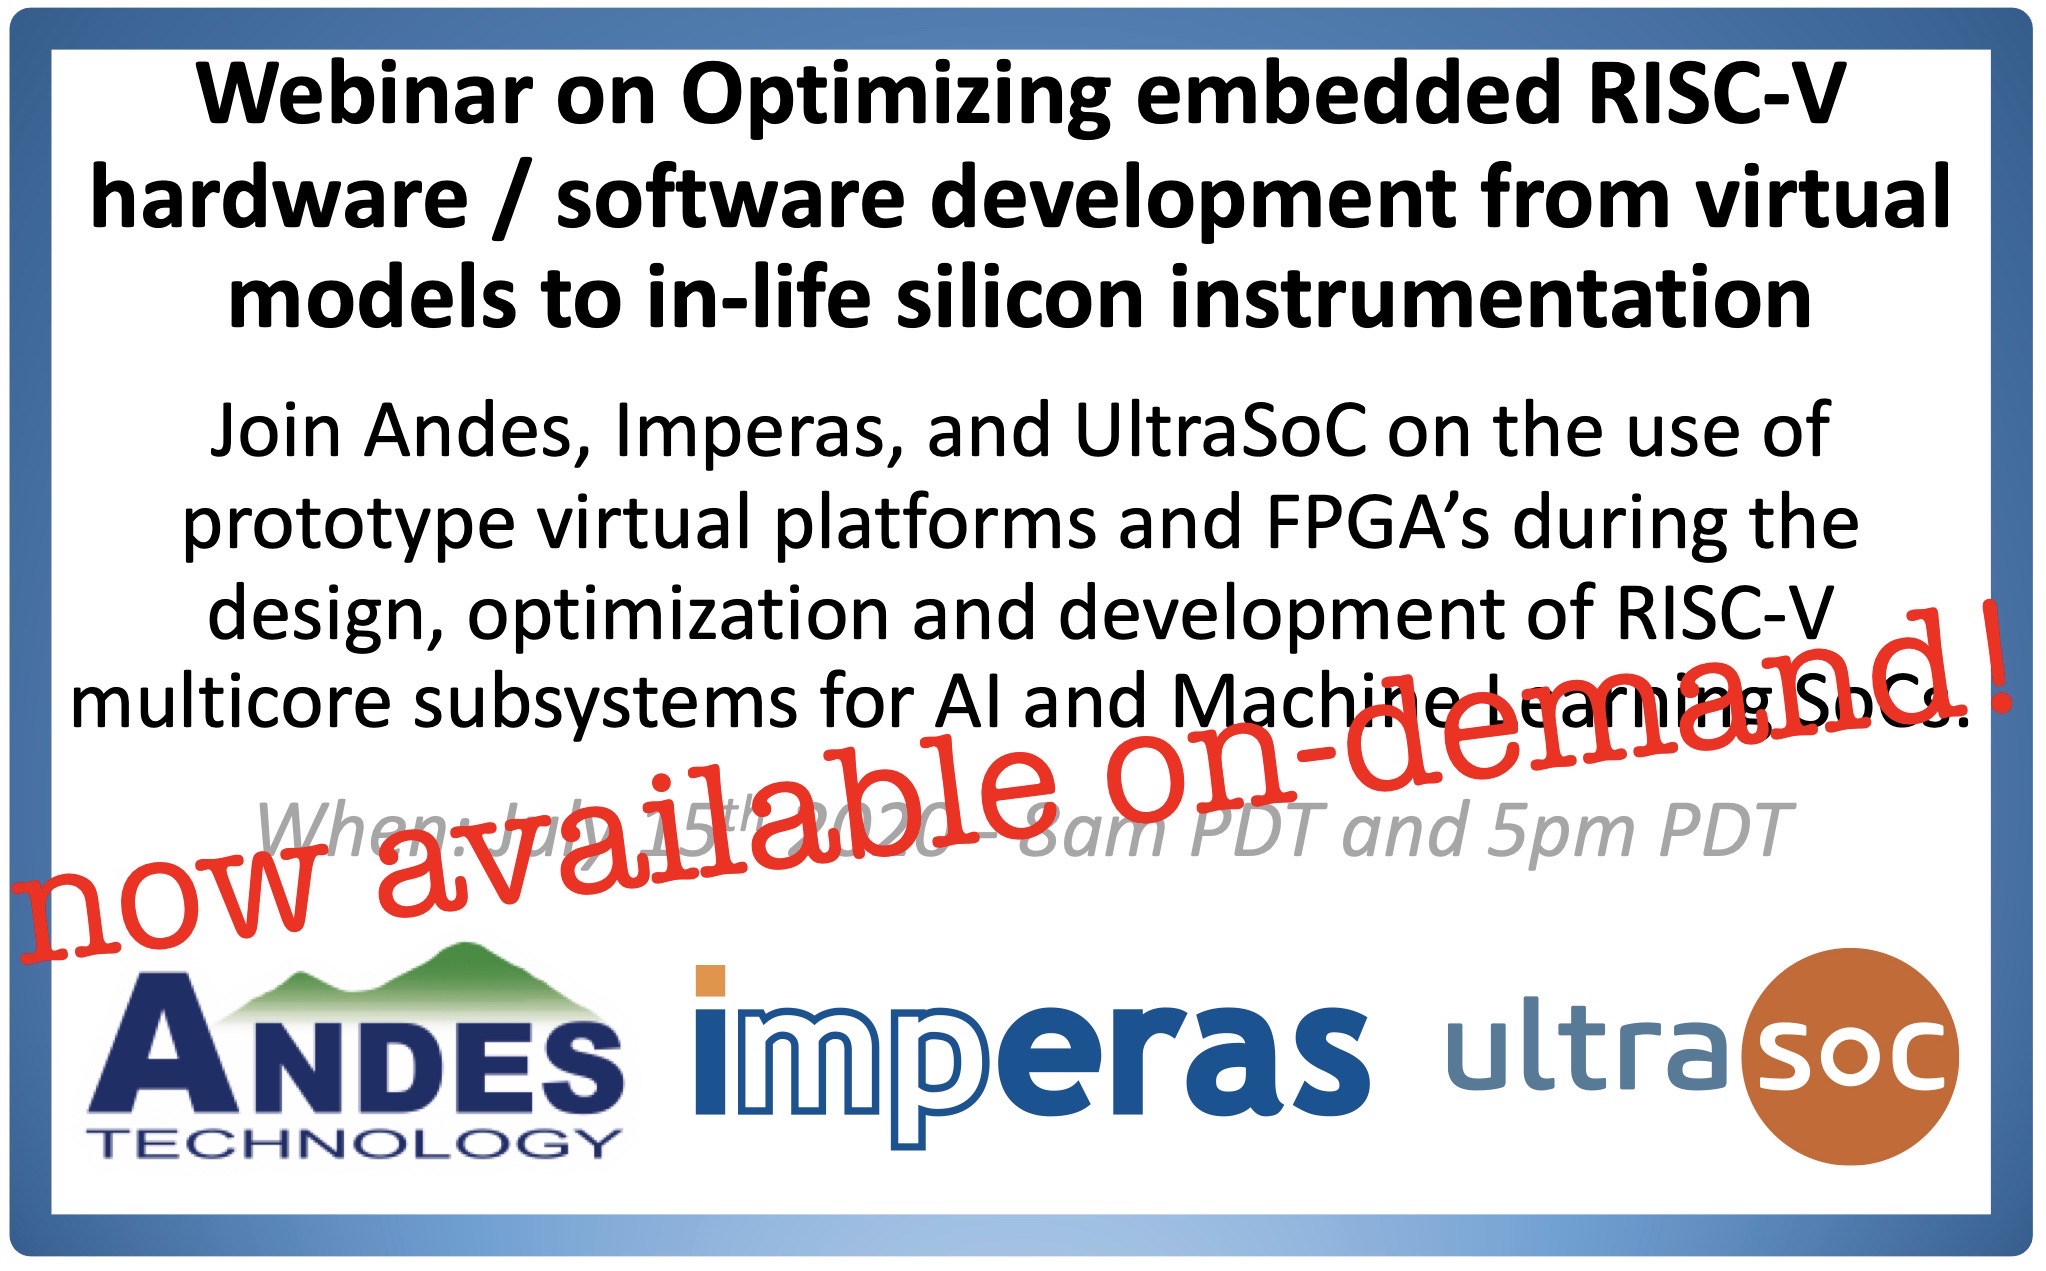 RISC-V Webinar with Andes, Imperas and UltraSoC